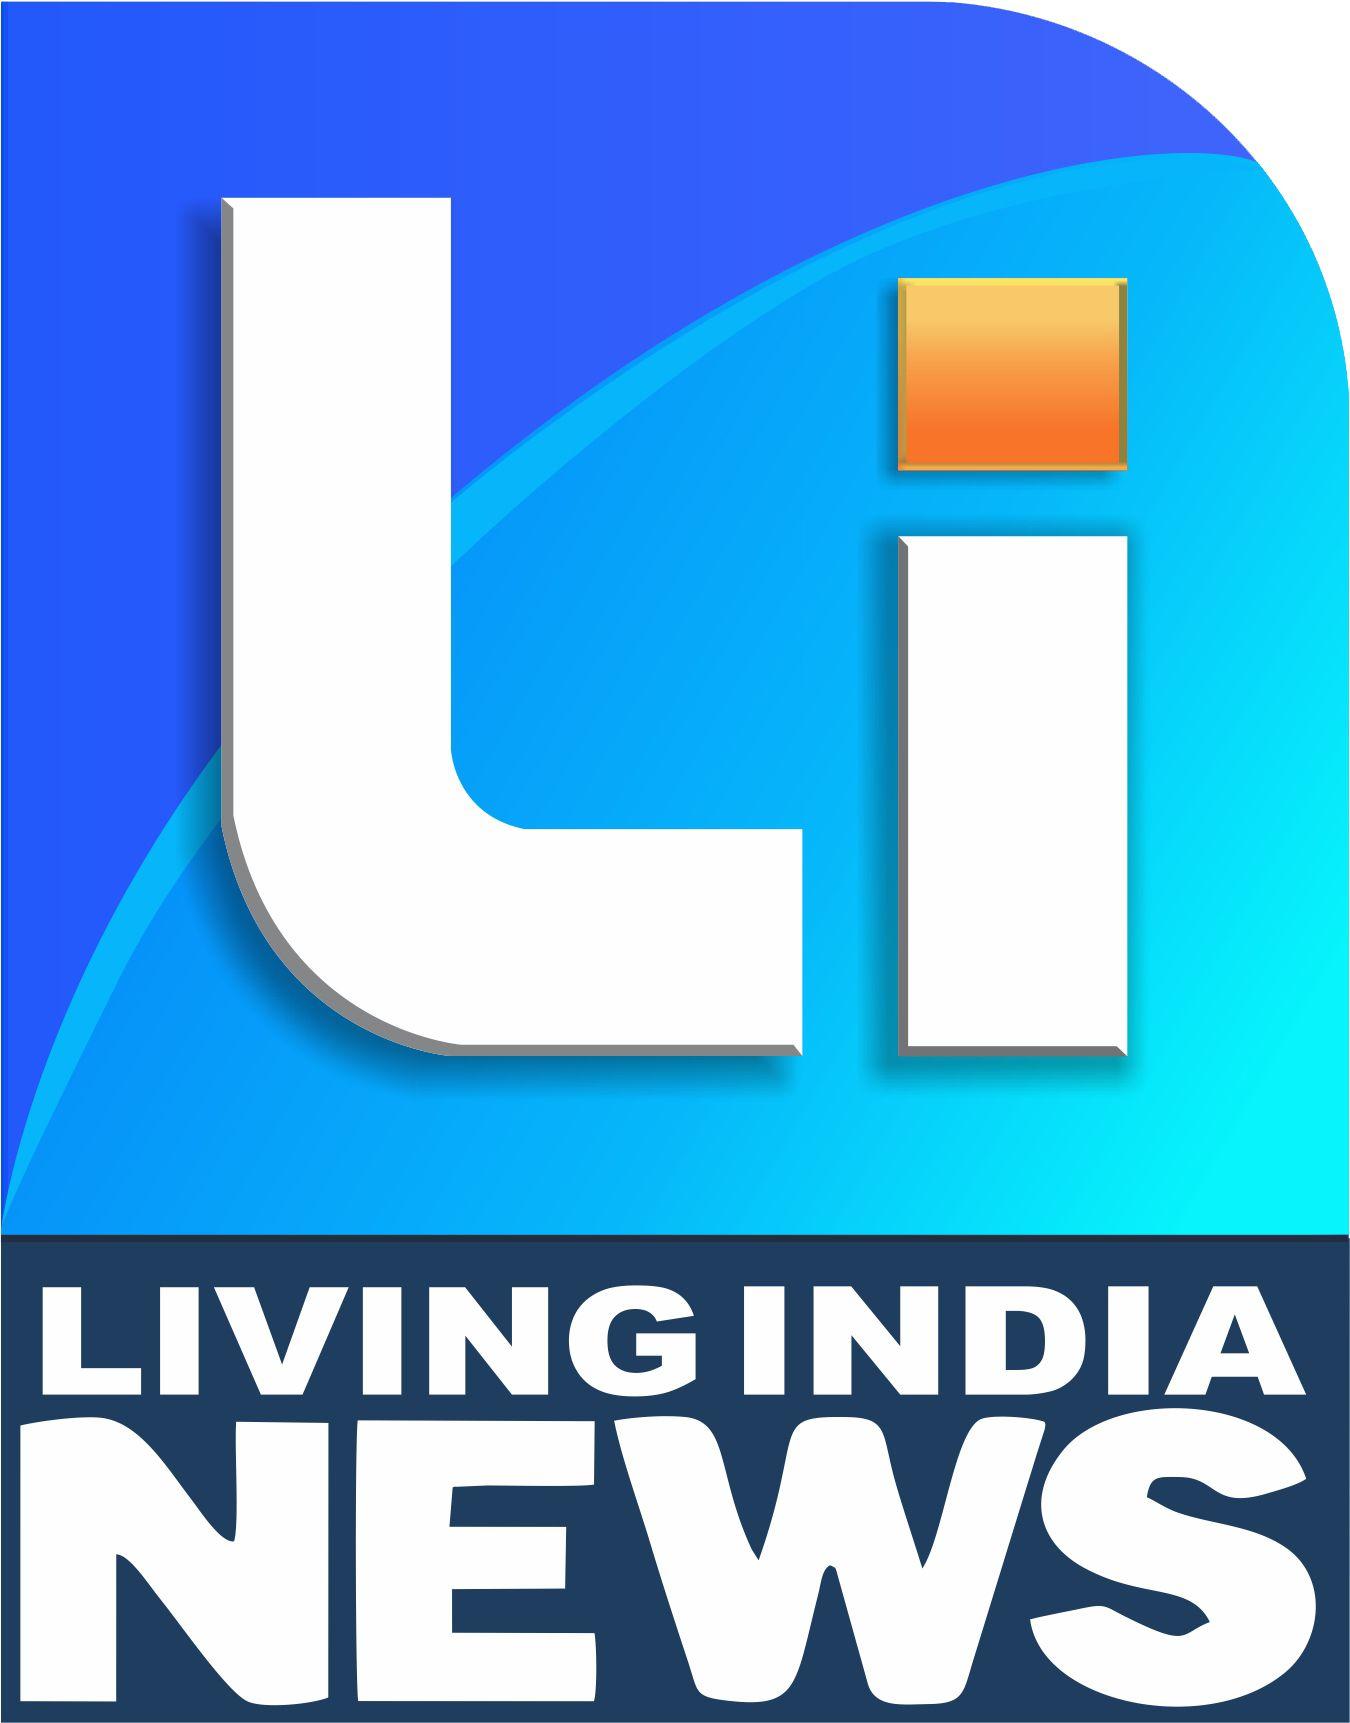 News Channel Logo - Living india news channel logo